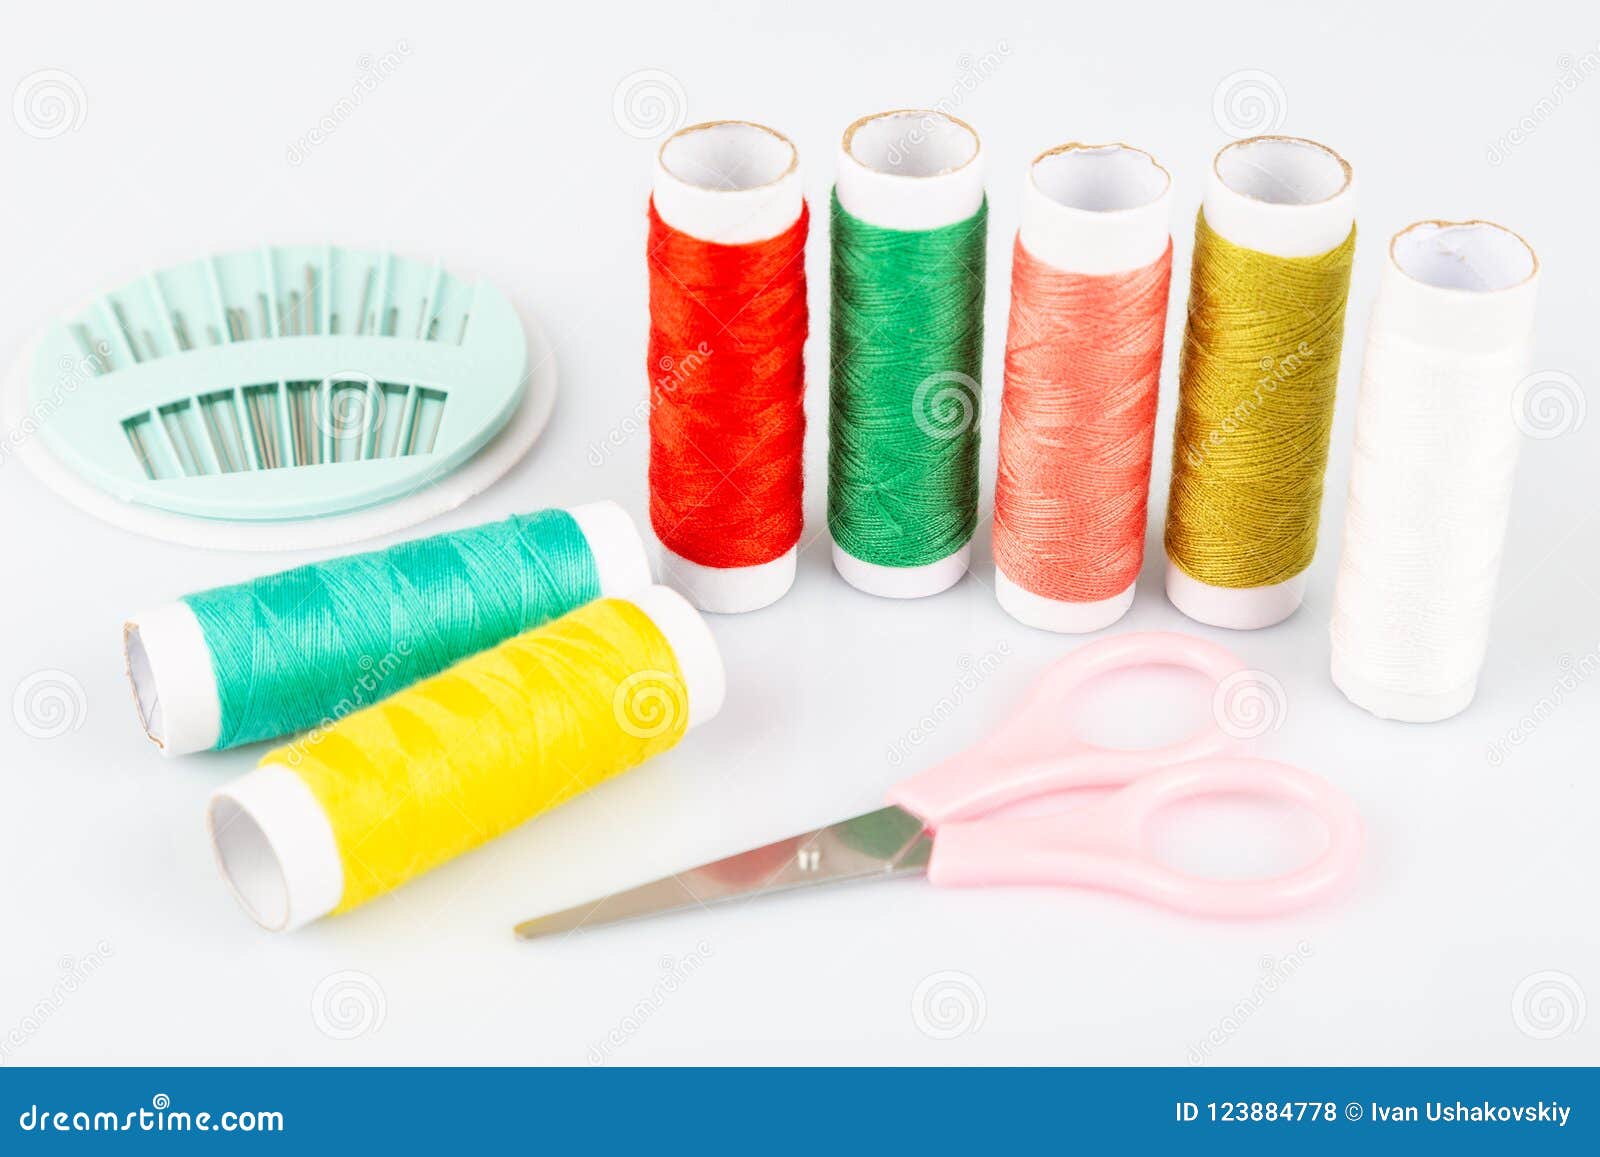 Sewing Kit with Colorful Spools of Threads and Instruments Stock Photo ...